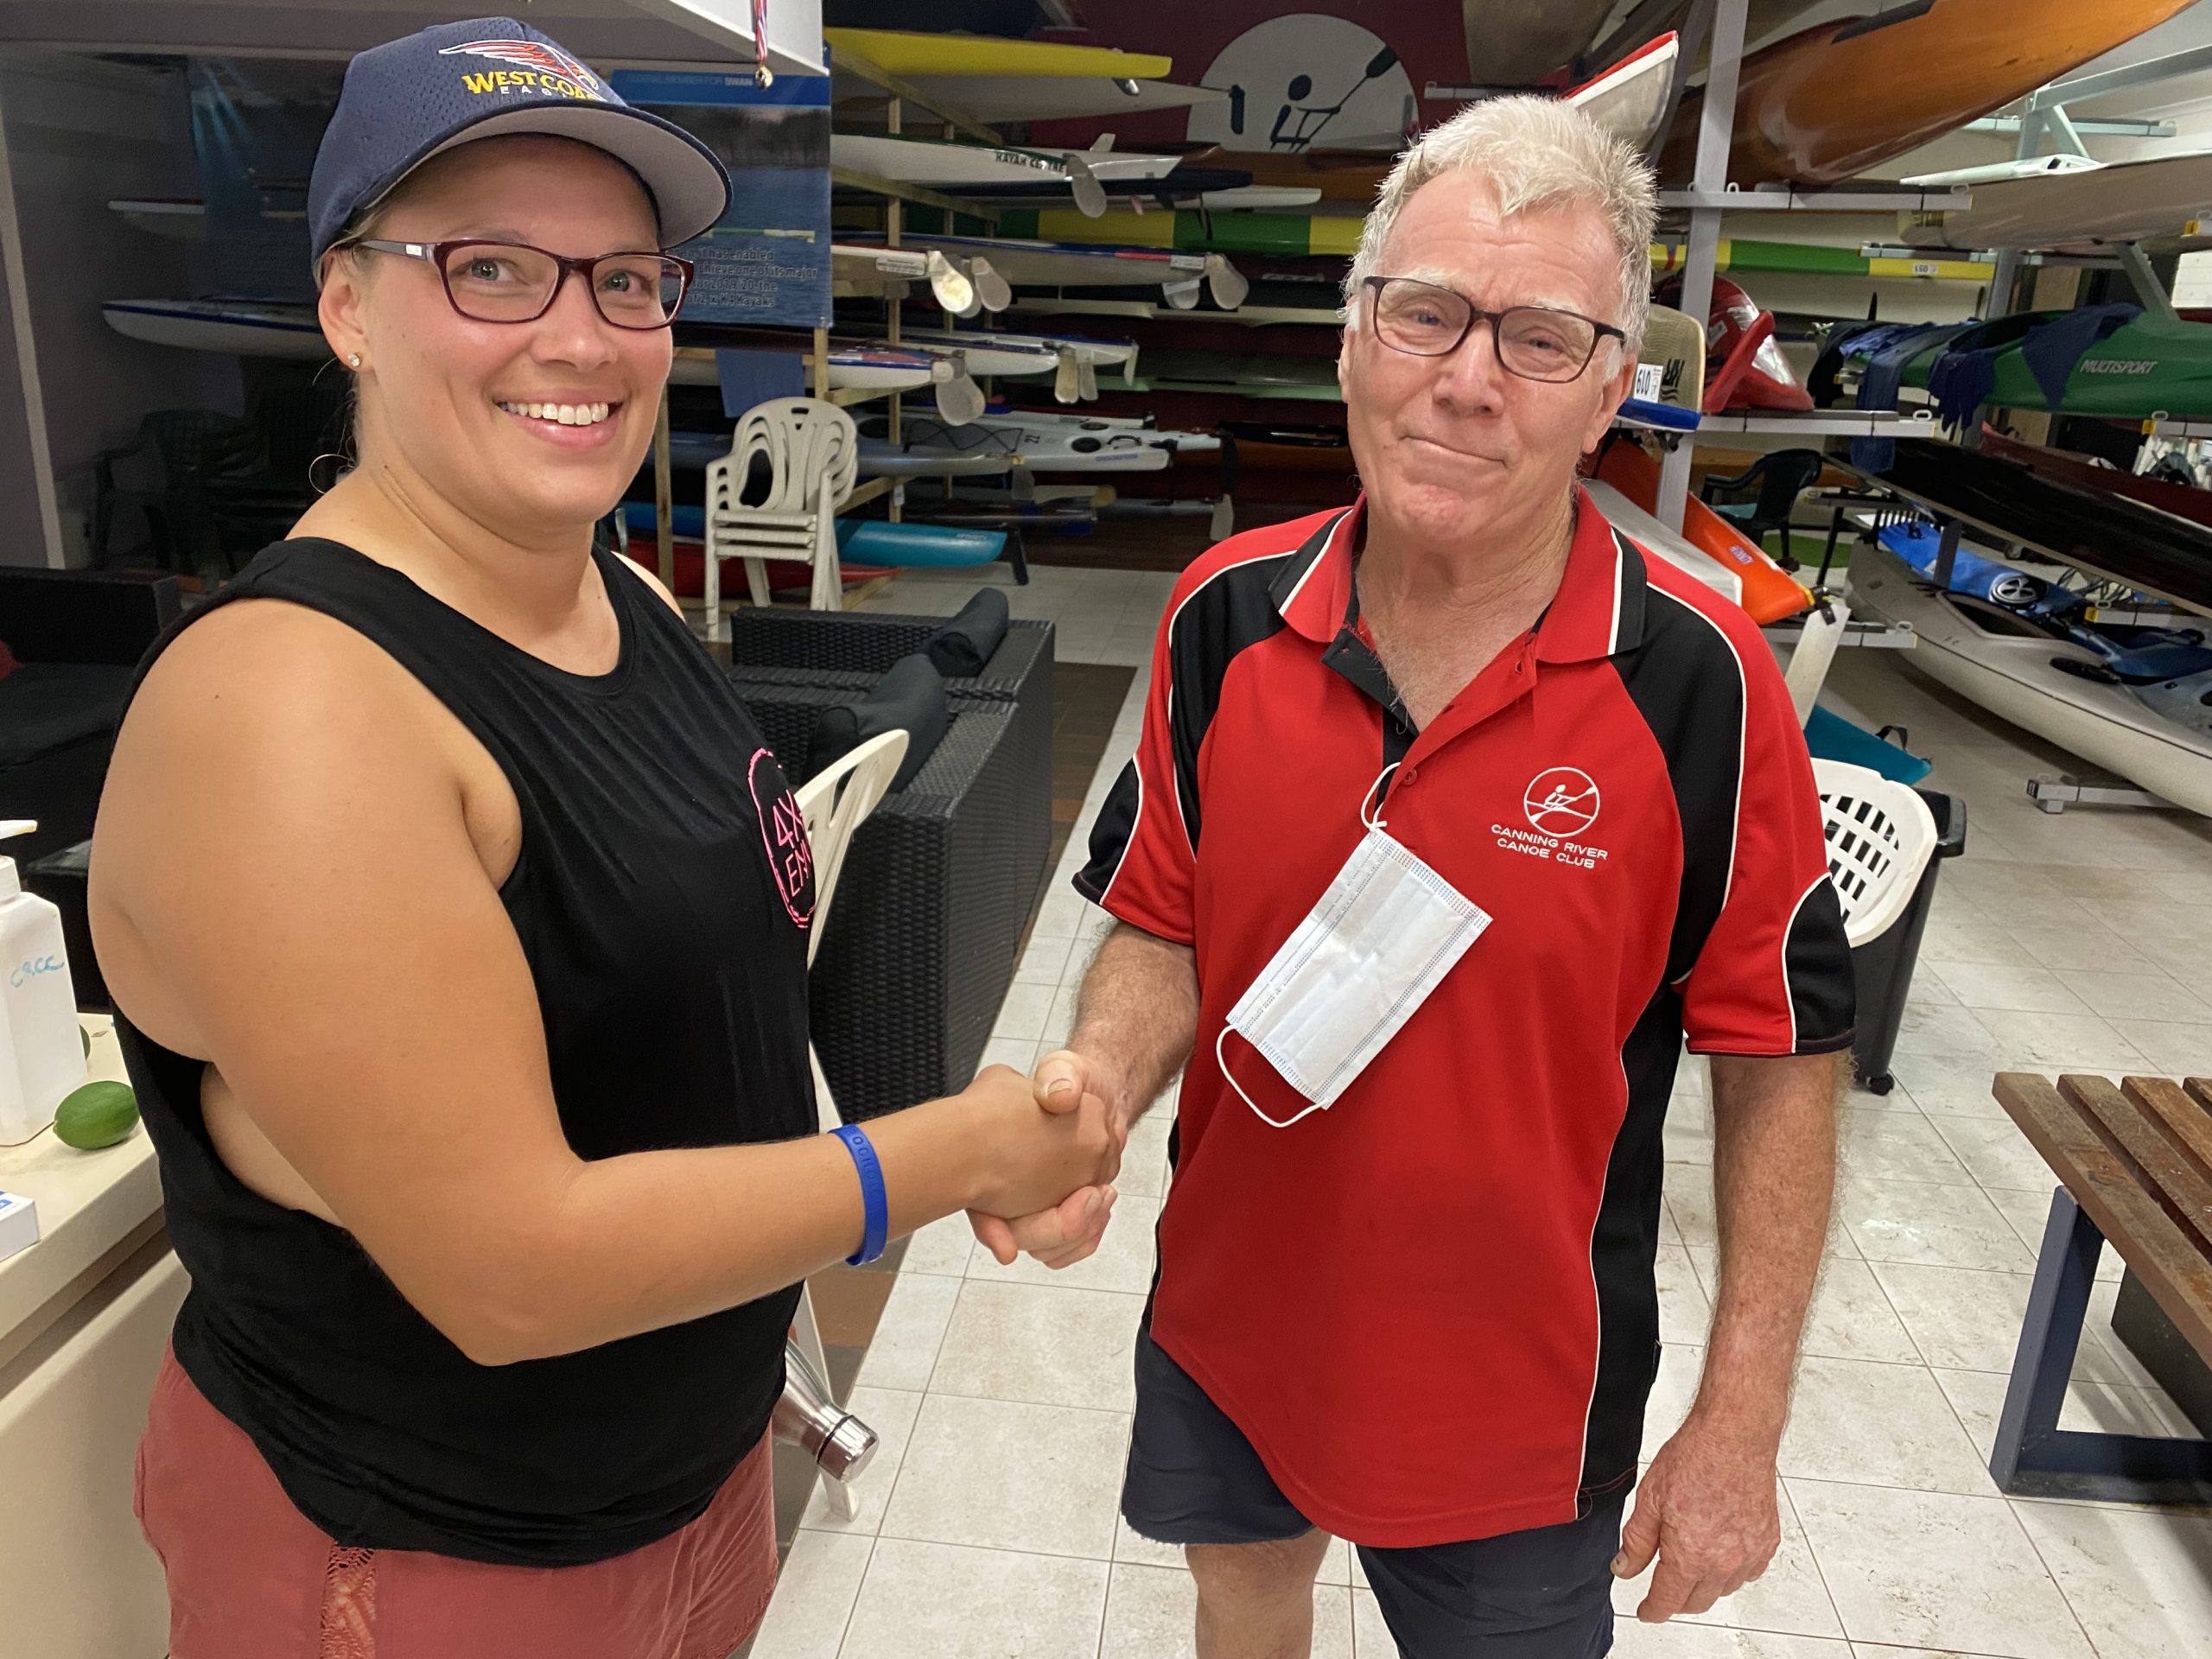 Tuesday 1st March 2022 : Tonight’s photos shows club member Malorie presenting David Gardiner with a movie voucher.